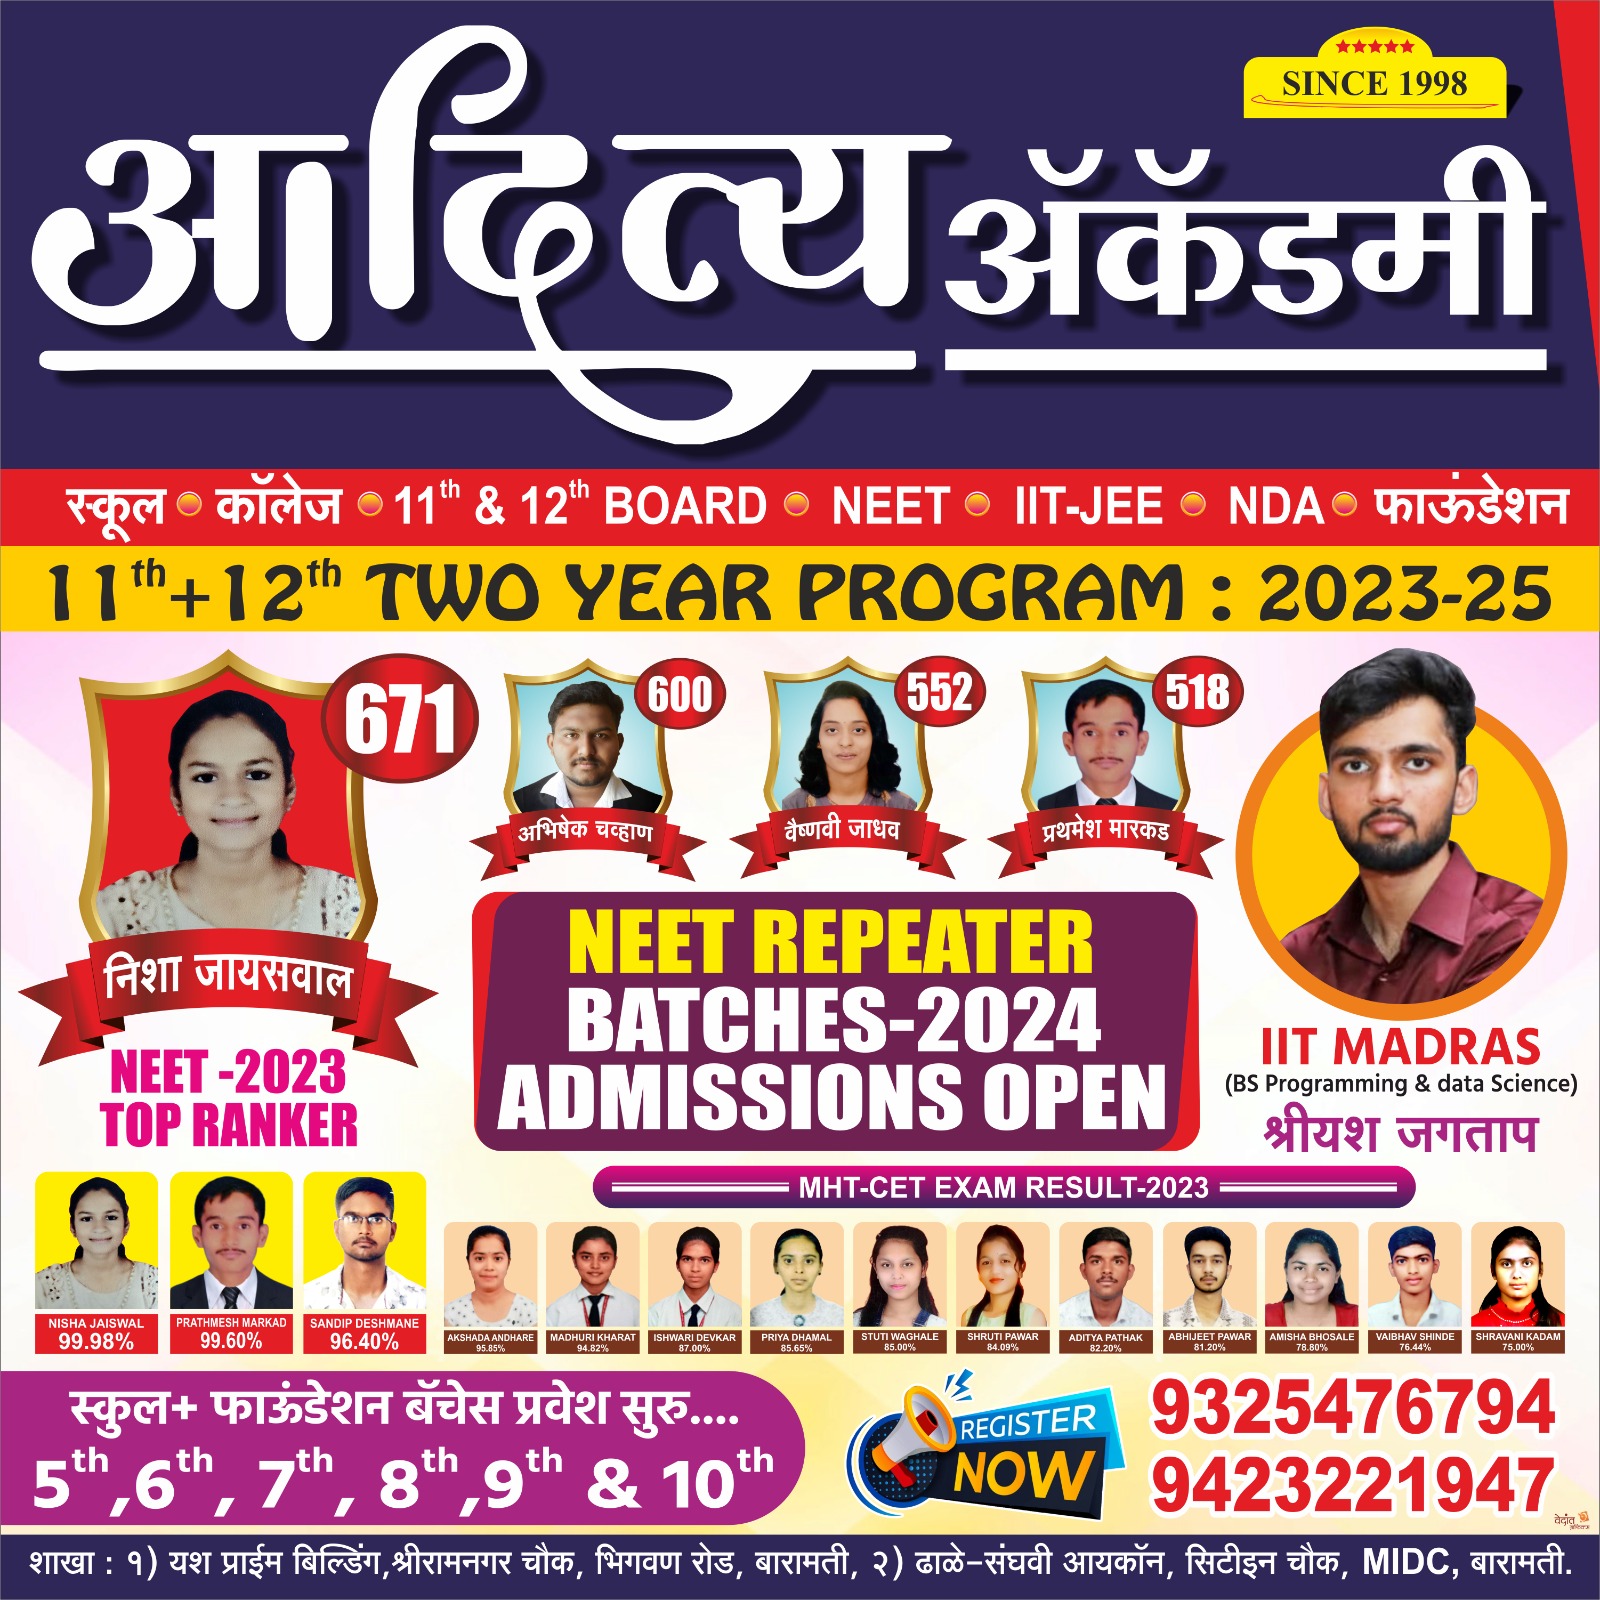 NEET Repeater Batches 2024 Admissions Open